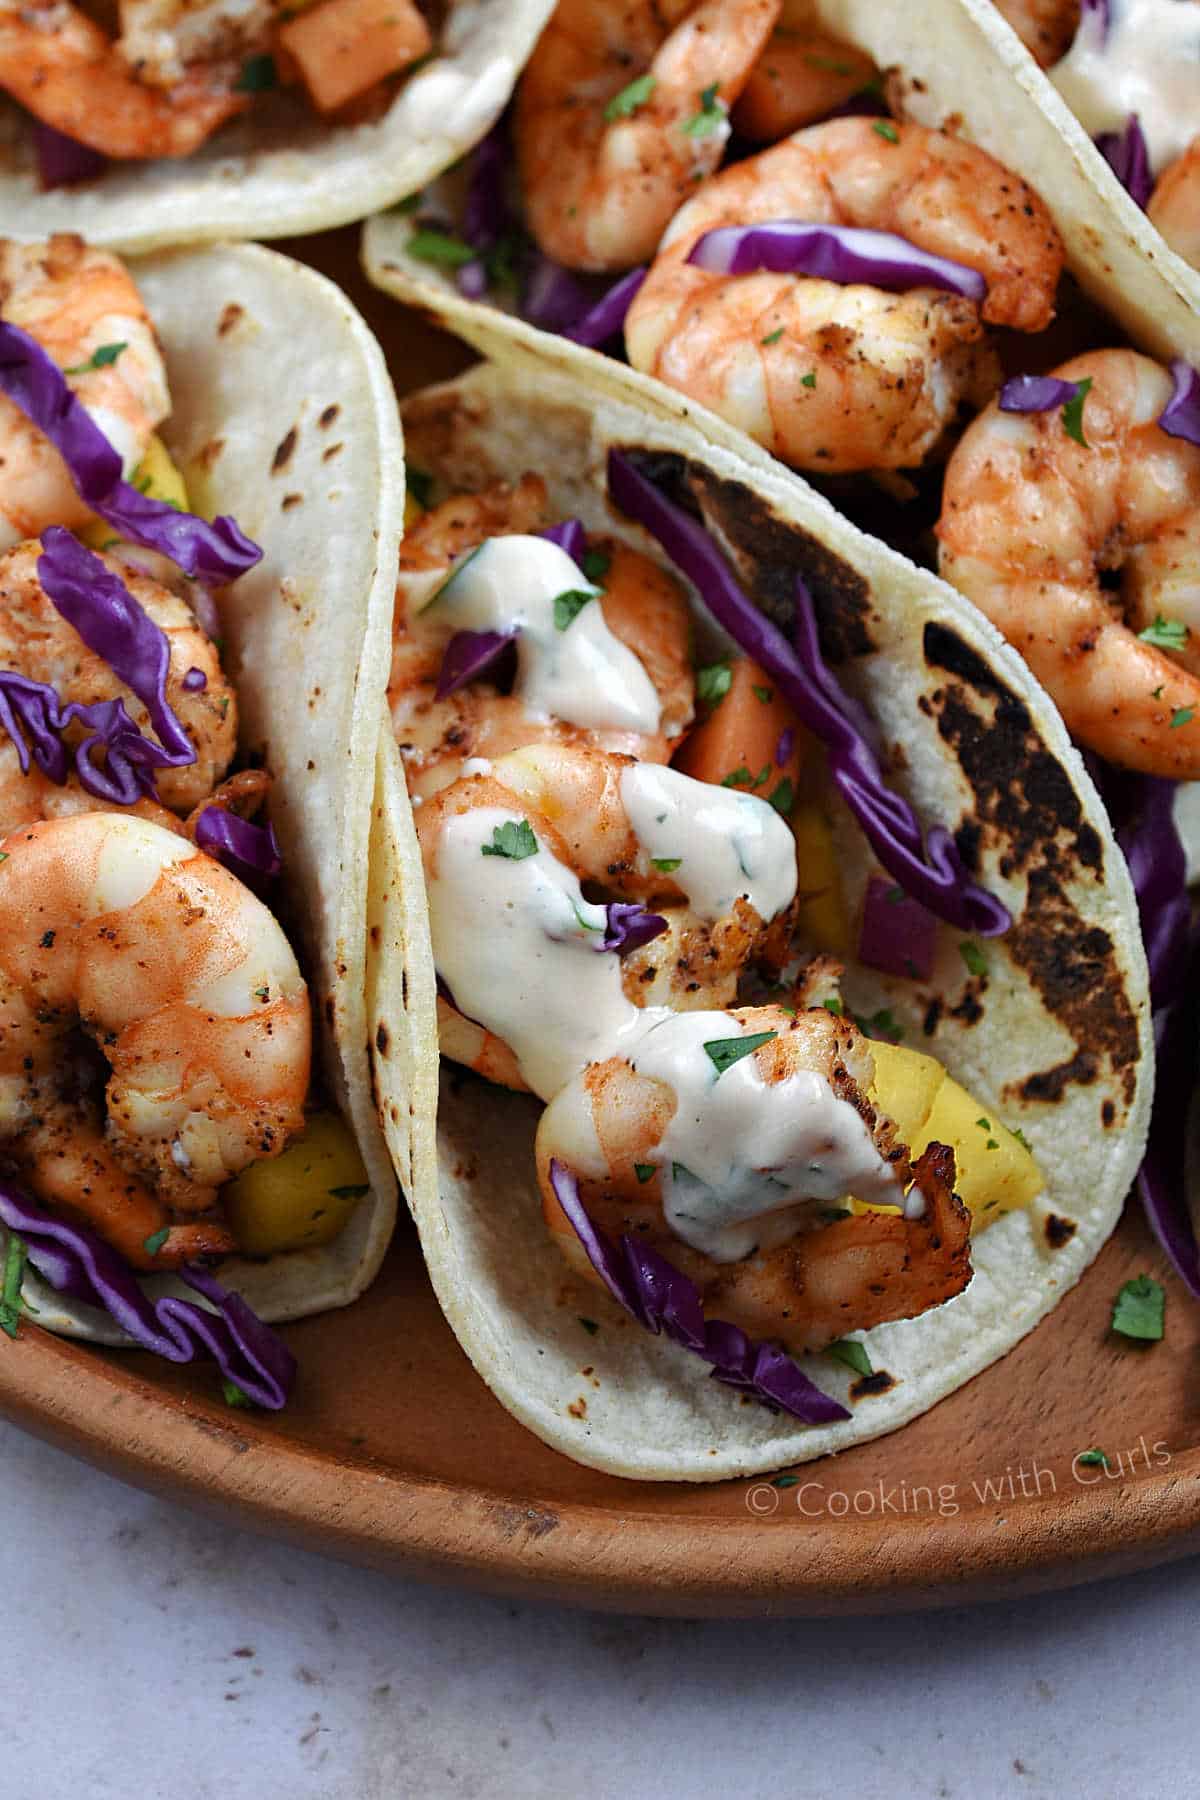 Grilled shrimp tacos topped with chipotle crema on a wooden plate.